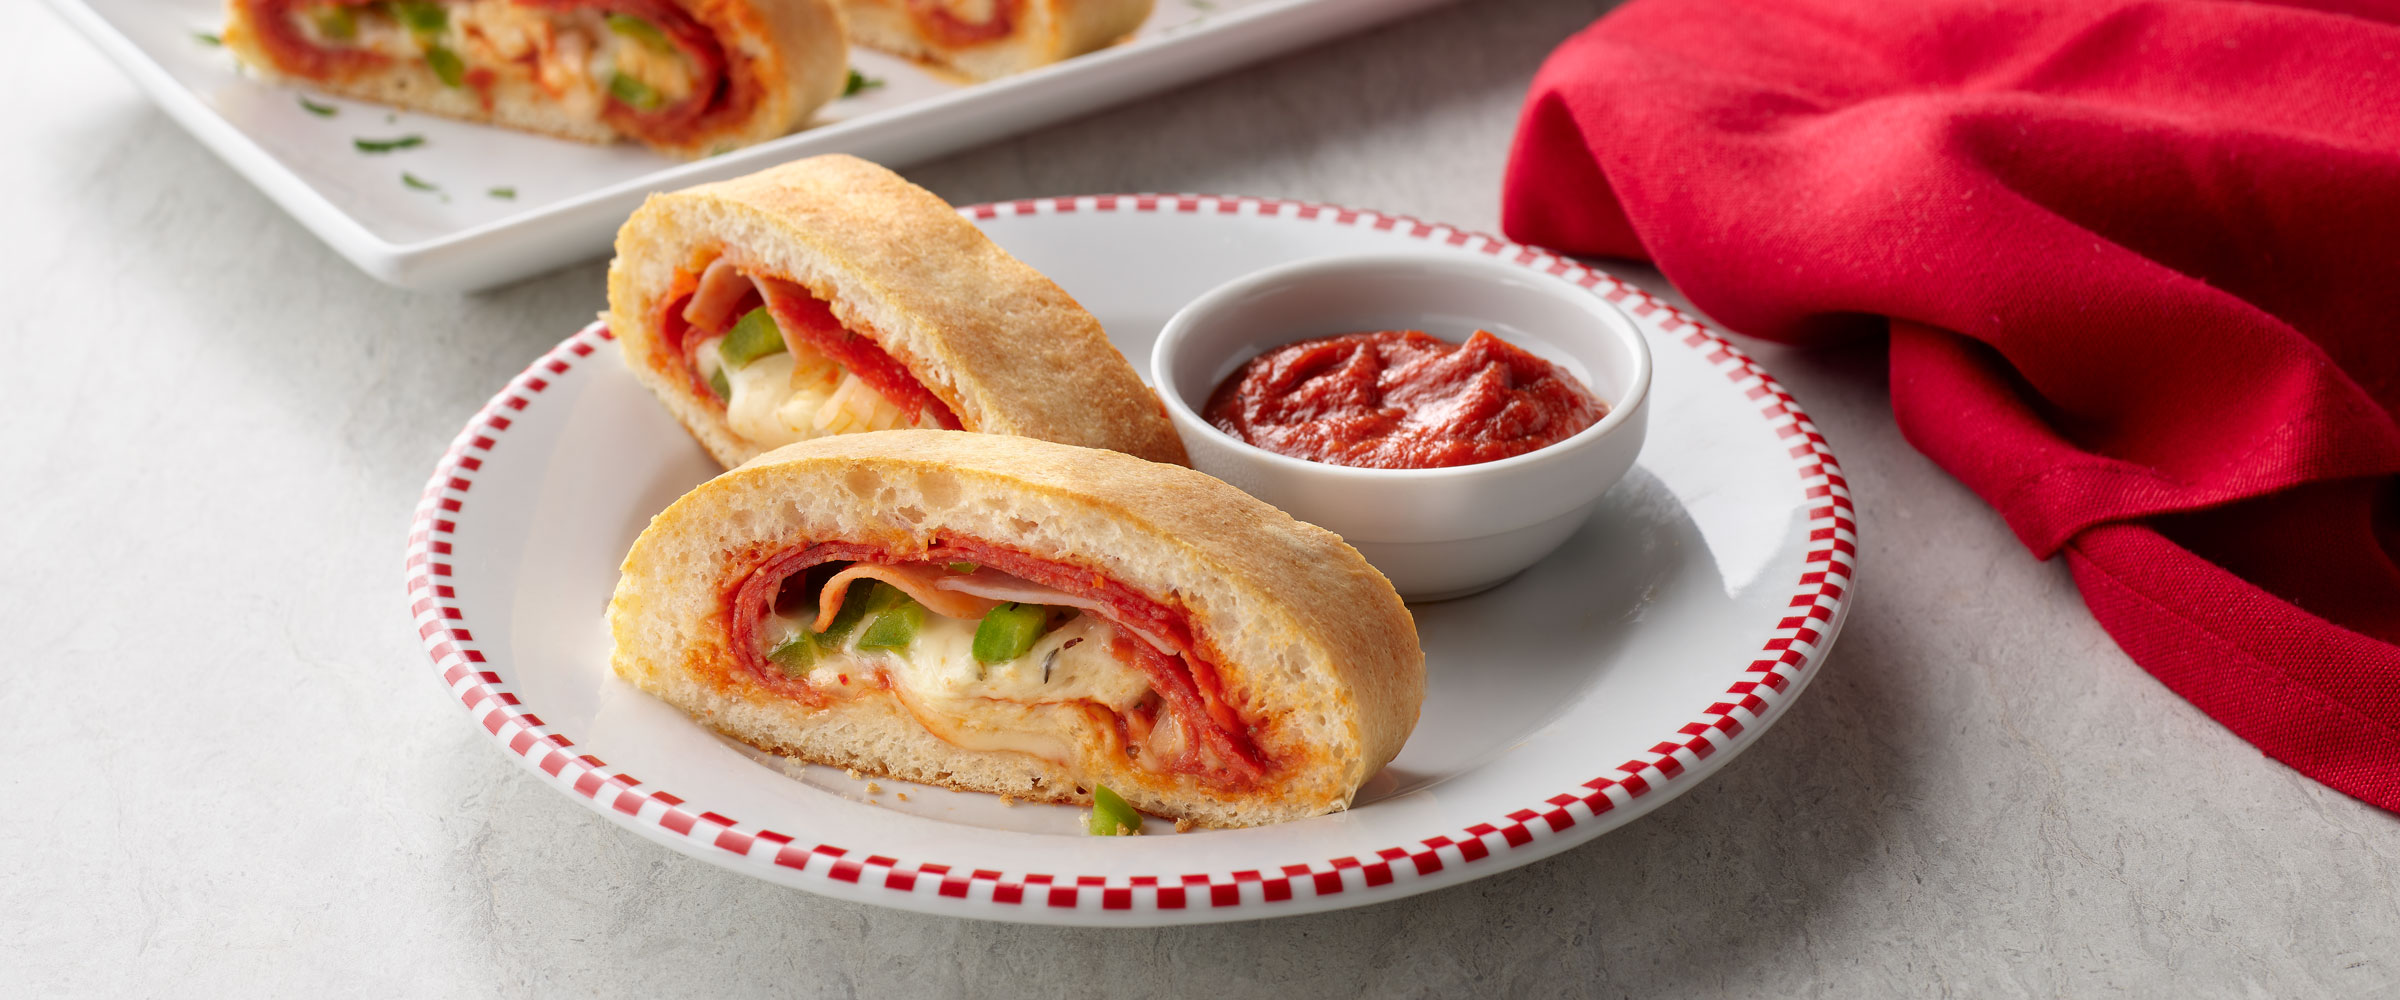 Easy Stromboli slices on plate with dipping sauce